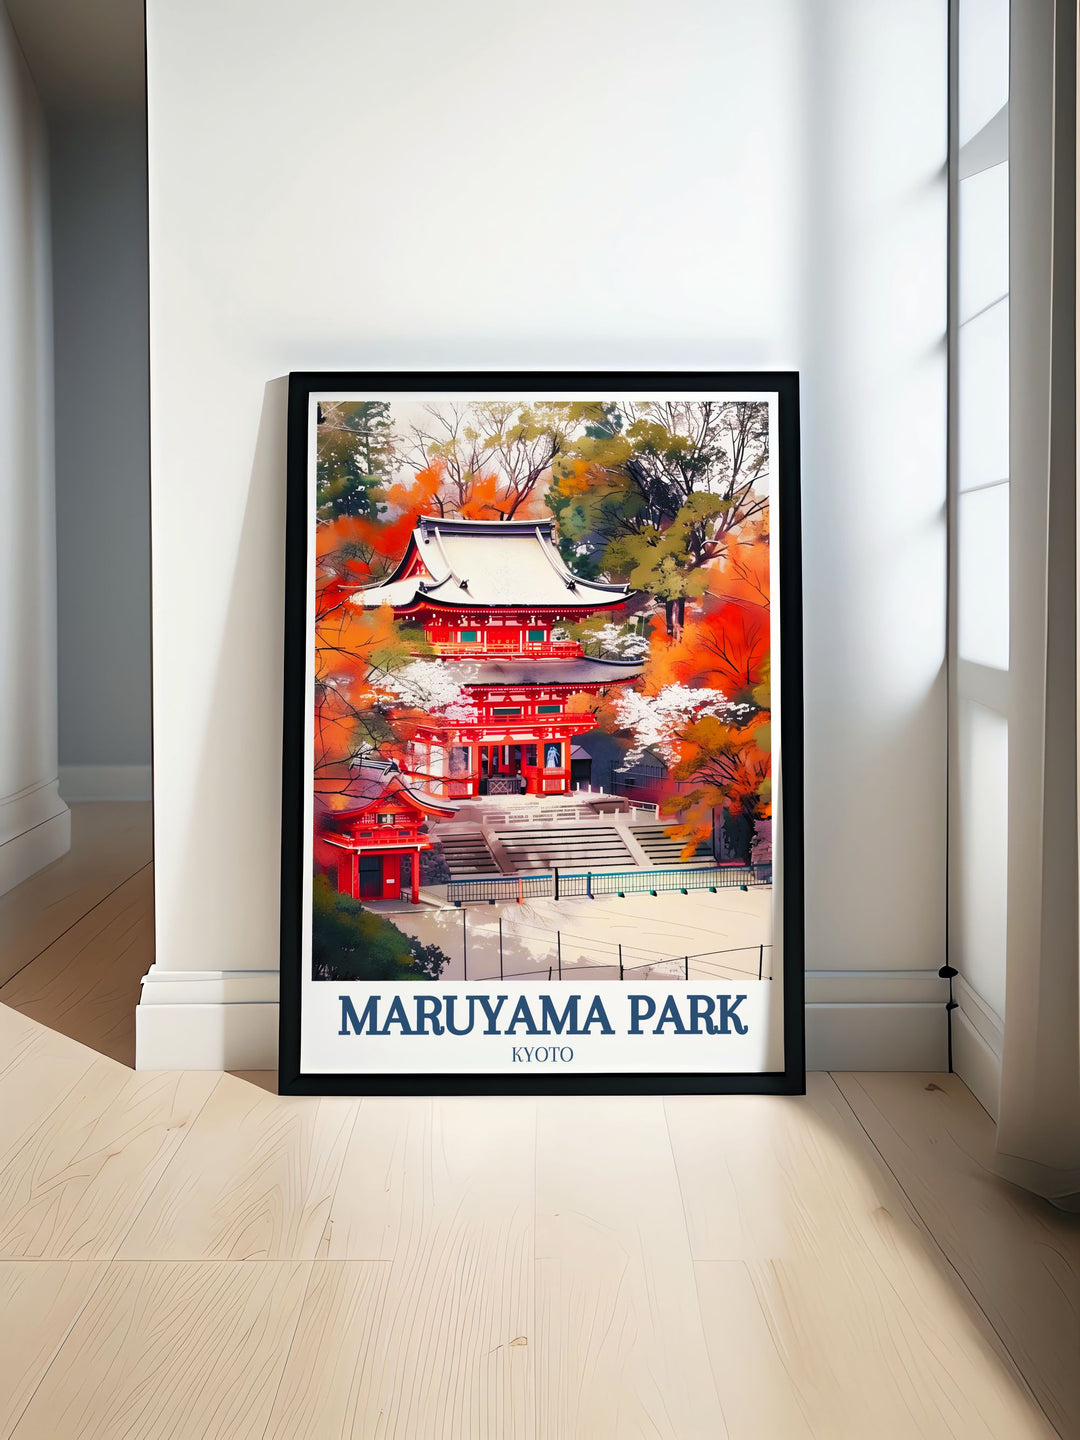 Beautiful Kyoto Nishiromon gate Maruyama Park cherry blossom print showcasing the tranquil Japanese garden perfect for adding elegance to your home decor ideal for anyone who loves Japan and appreciates fine art a great travel poster for any living space